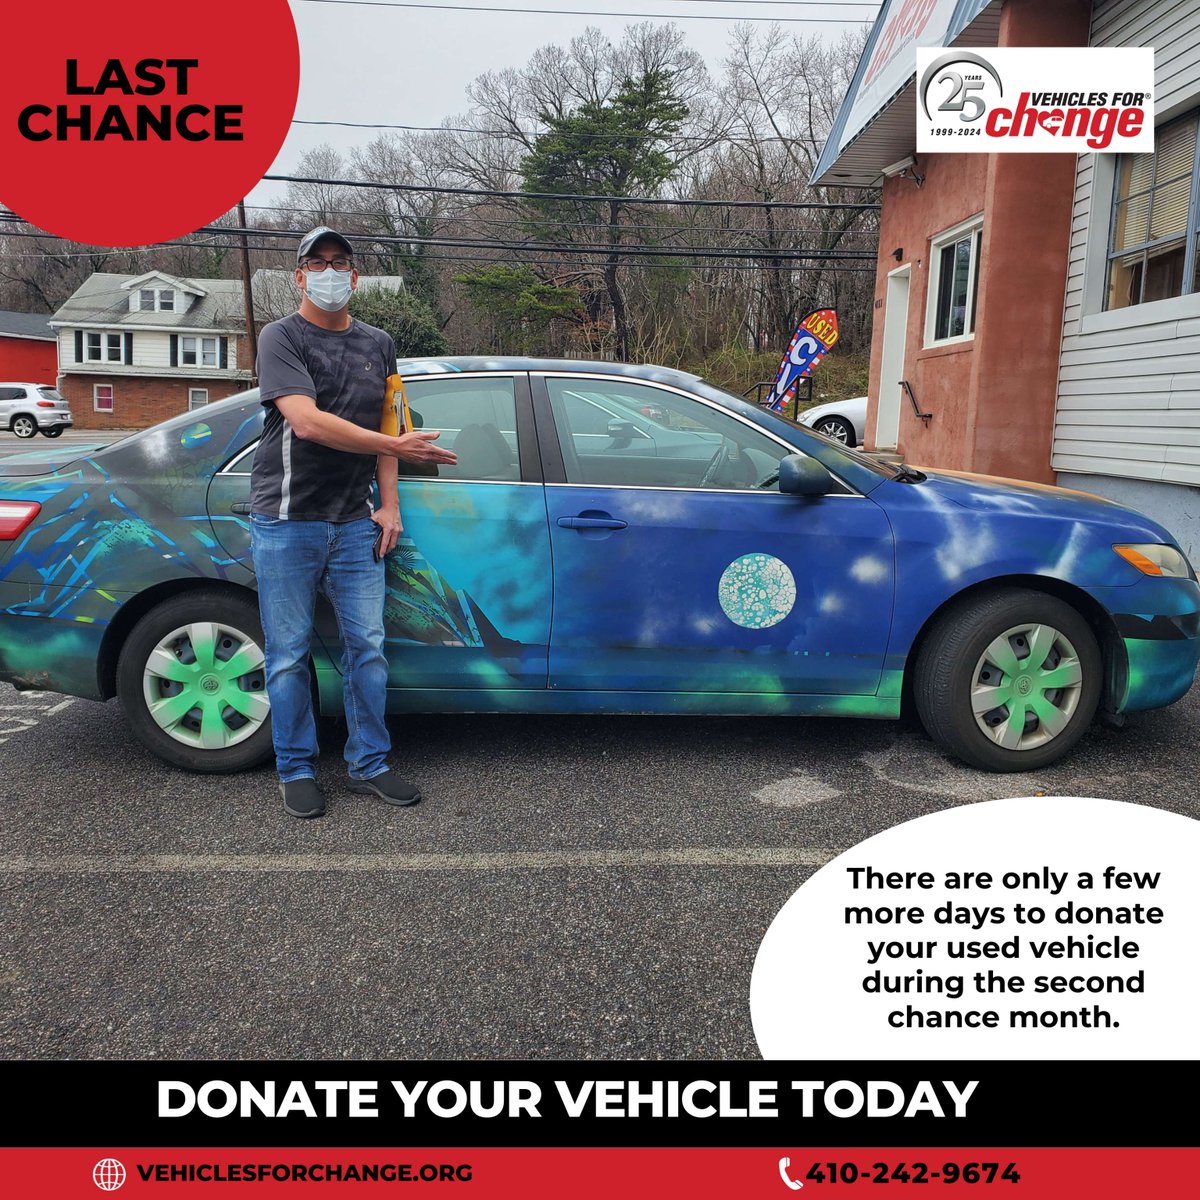 Don't miss your chance to make a significant impact this month.

Donate your vehicle today and drive hope into the heart of our community. vehiclesforchange.org/online-car-don…

#DonateForChange #VehicleDonation #DriveImpact #LastChanceApril #VehiclesforChange #SecondChanceMonth